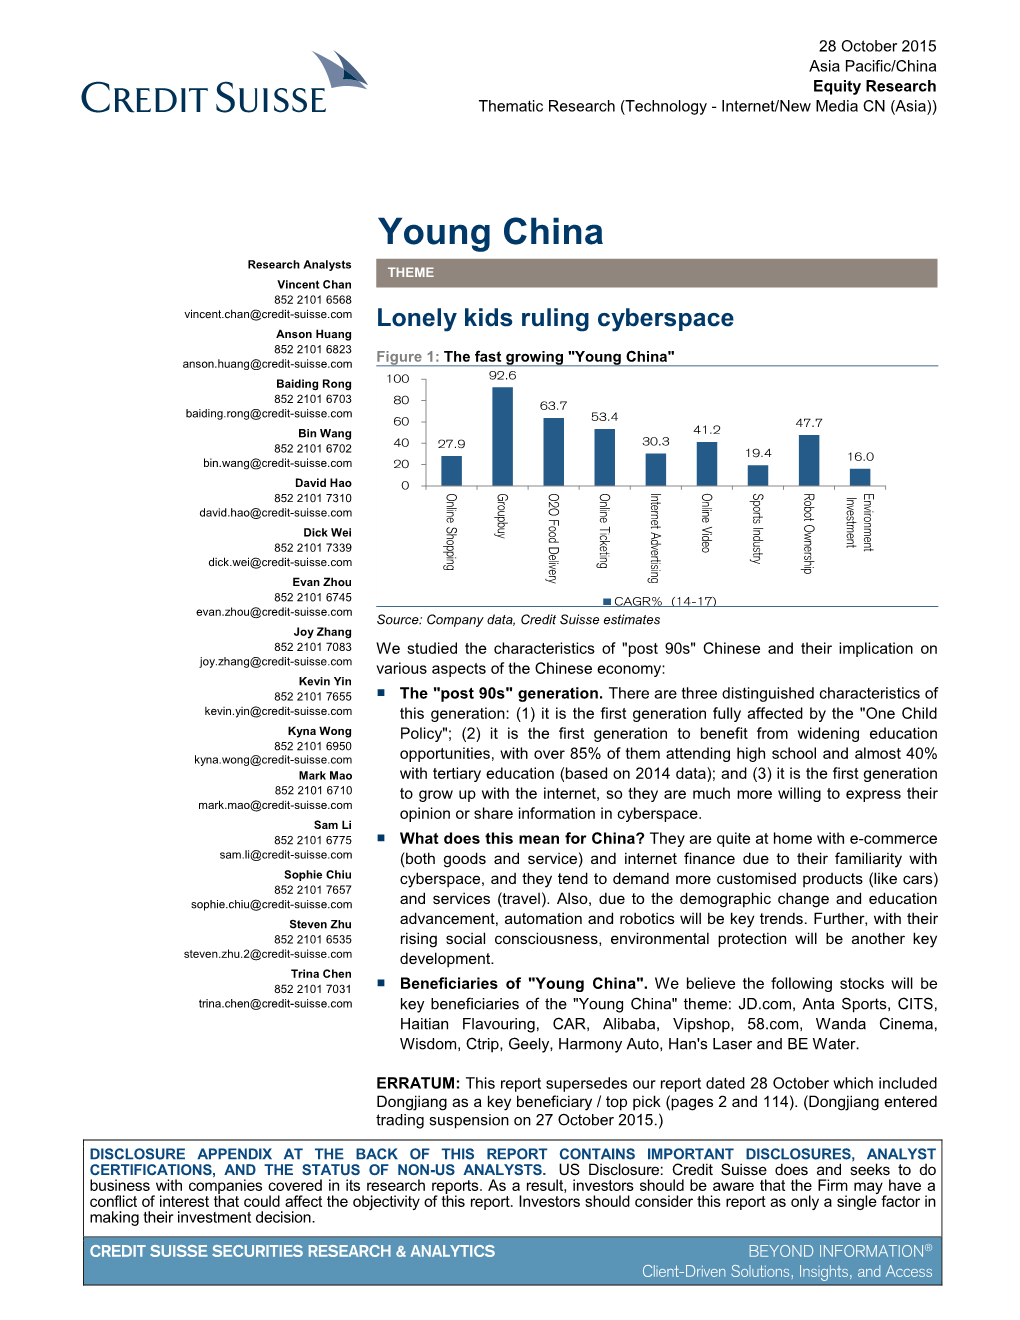 Young China Research Analysts THEME